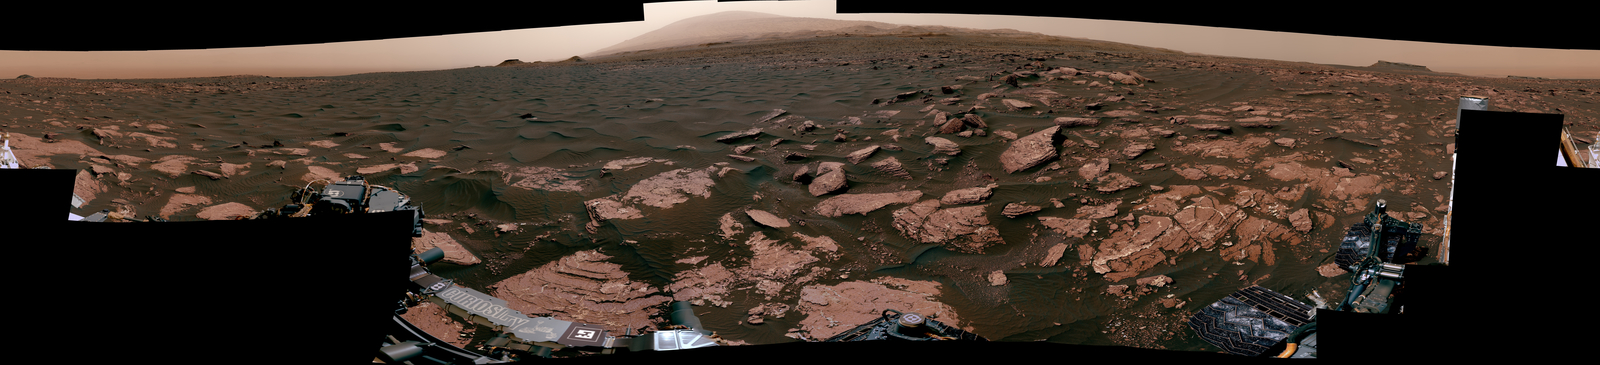 Panorama with Active Linear Dune in Gale Crater, Mars